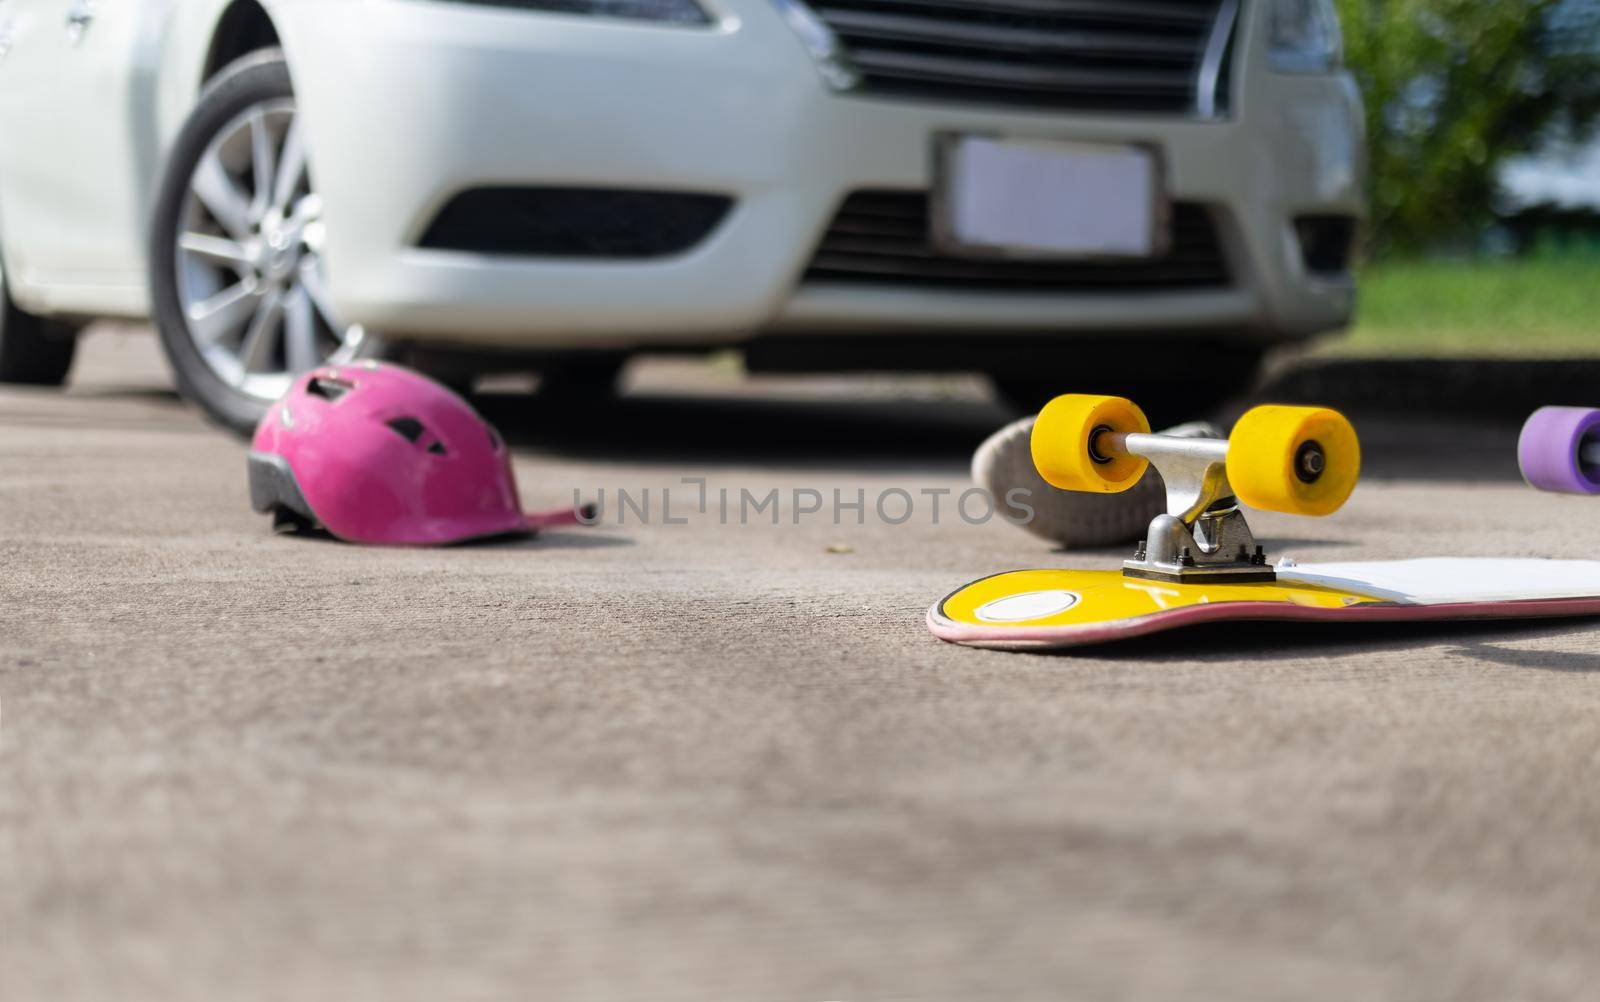 Accident skateboard crashes car after stunt on street and lost control. by toa55